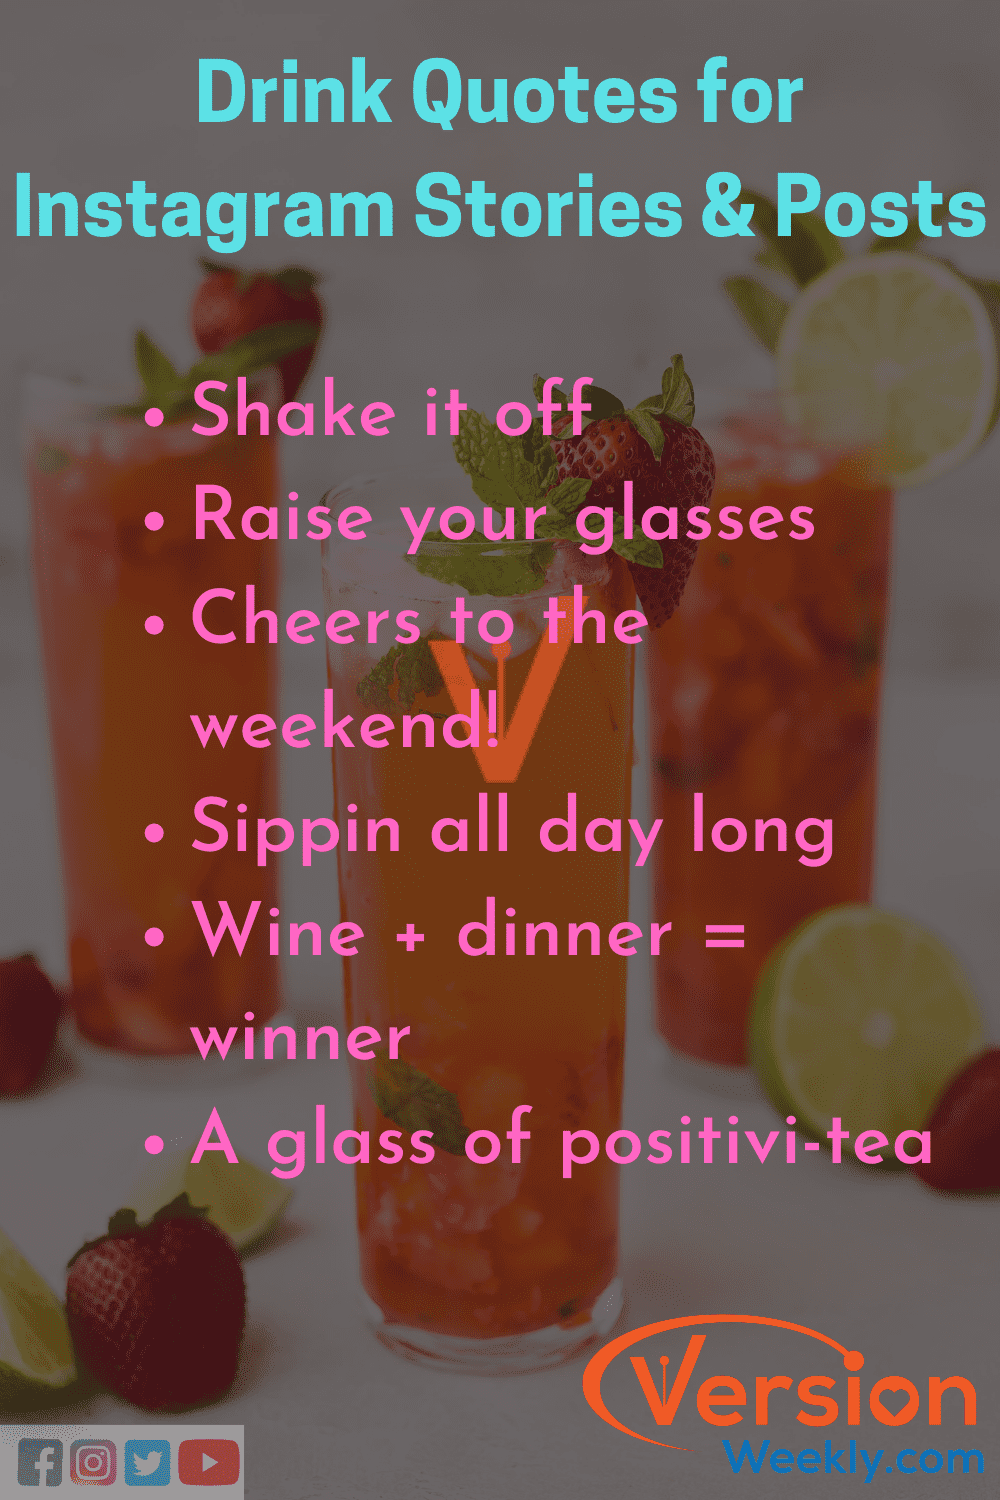 Instagram quotes for drink quotes